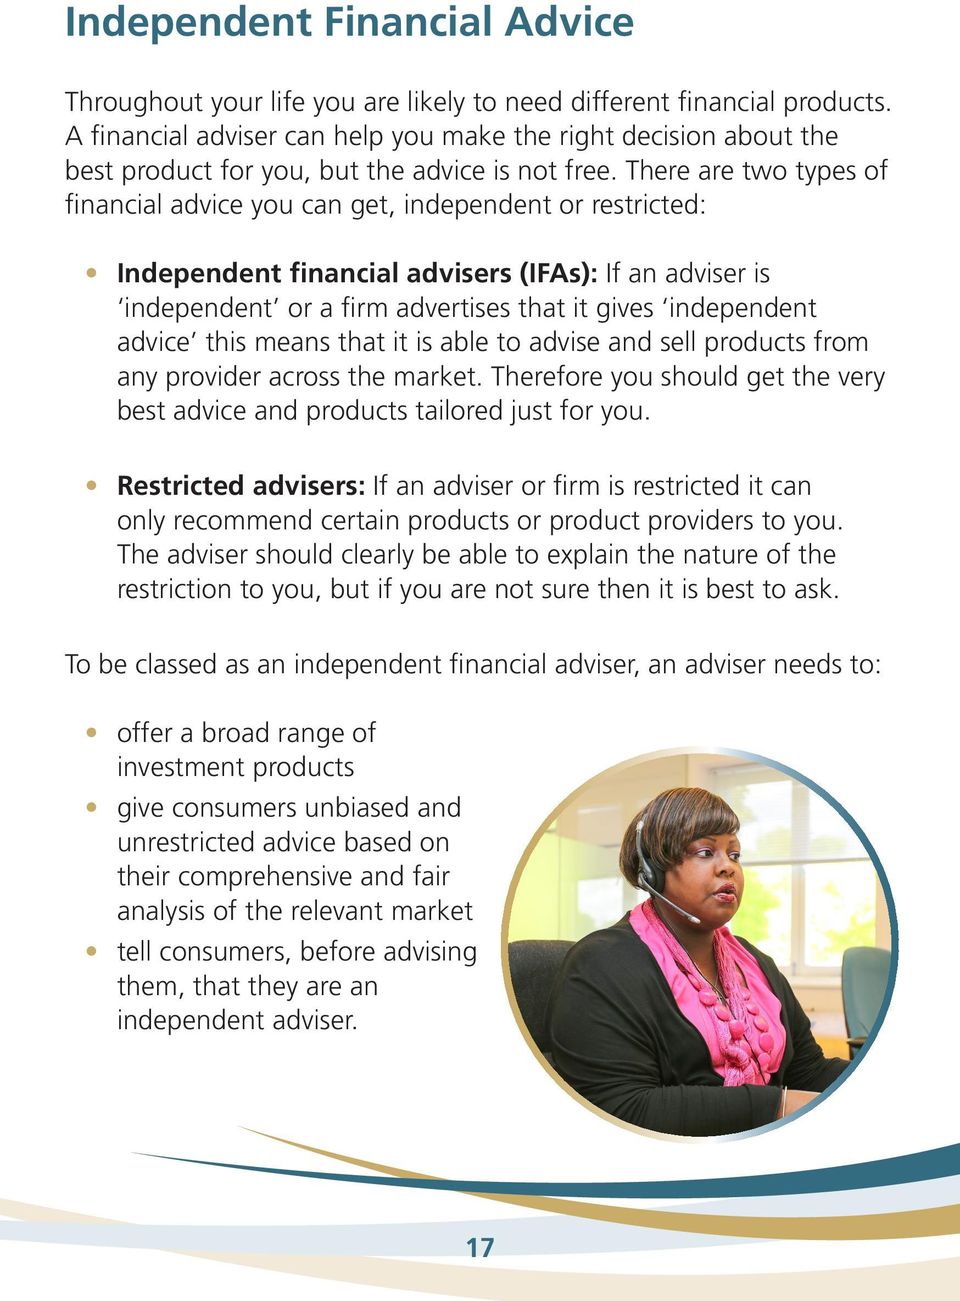 There are two types of financial advice you can get, independent or restricted: Independent financial advisers (IFAs): If an adviser is independent or a firm advertises that it gives independent